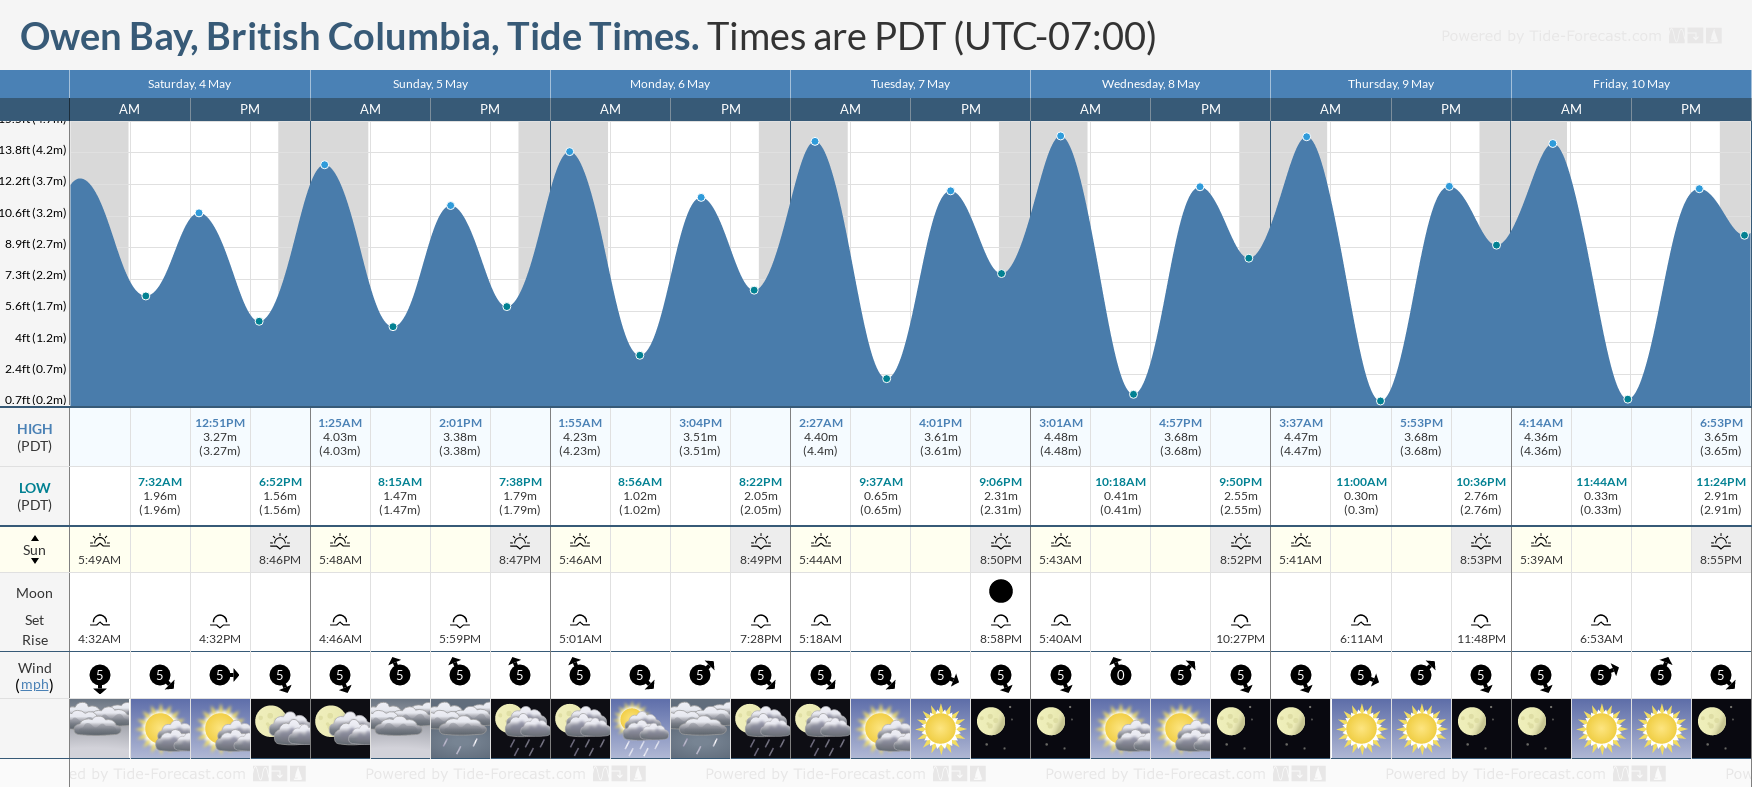 Owen Bay, British Columbia Tide Chart including high and low tide tide times for the next 7 days